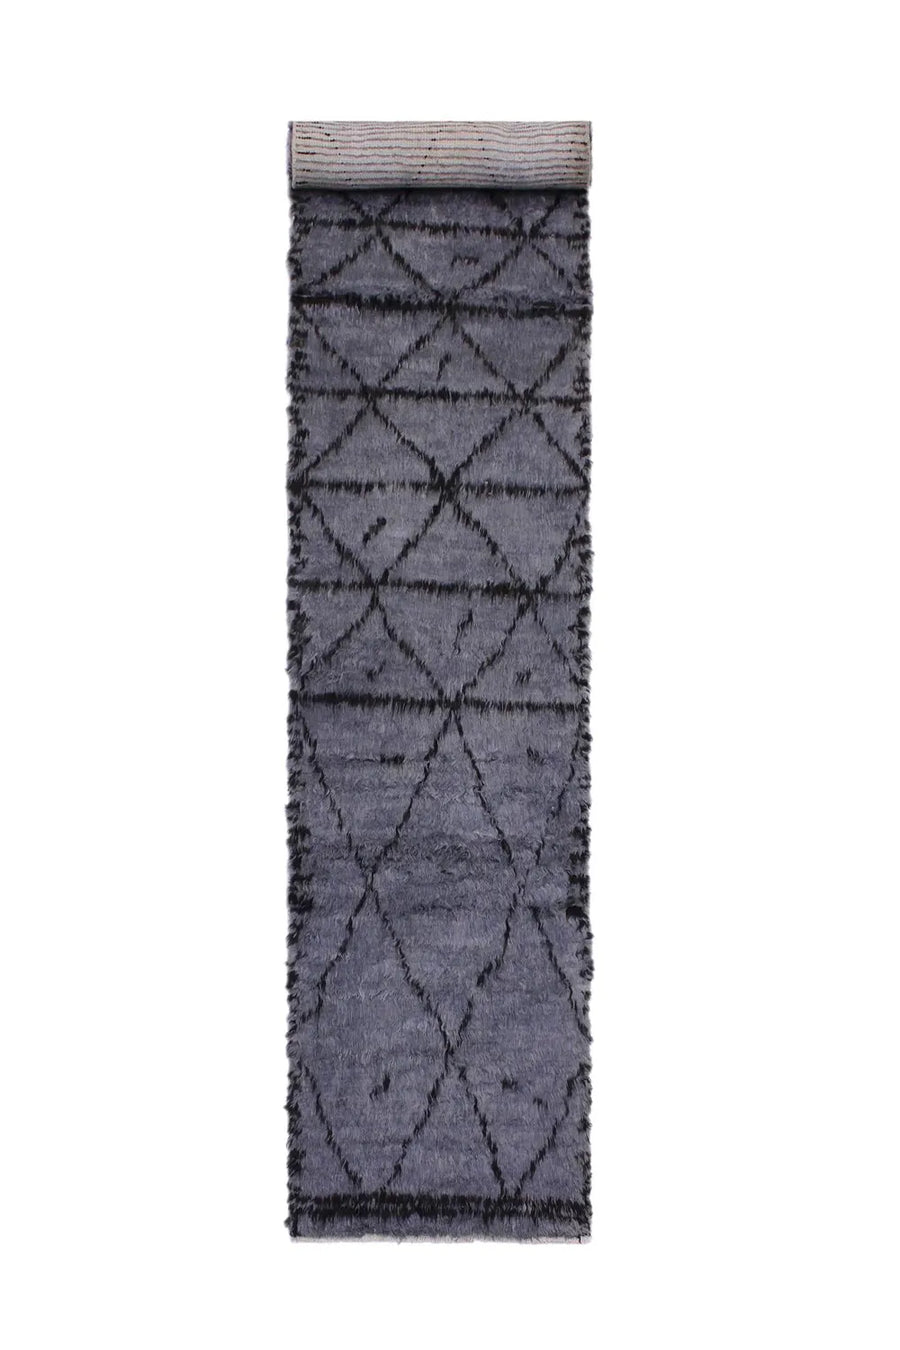 Dark gray wool runner rug with a shag pile, perfect for adding warmth to hallways.